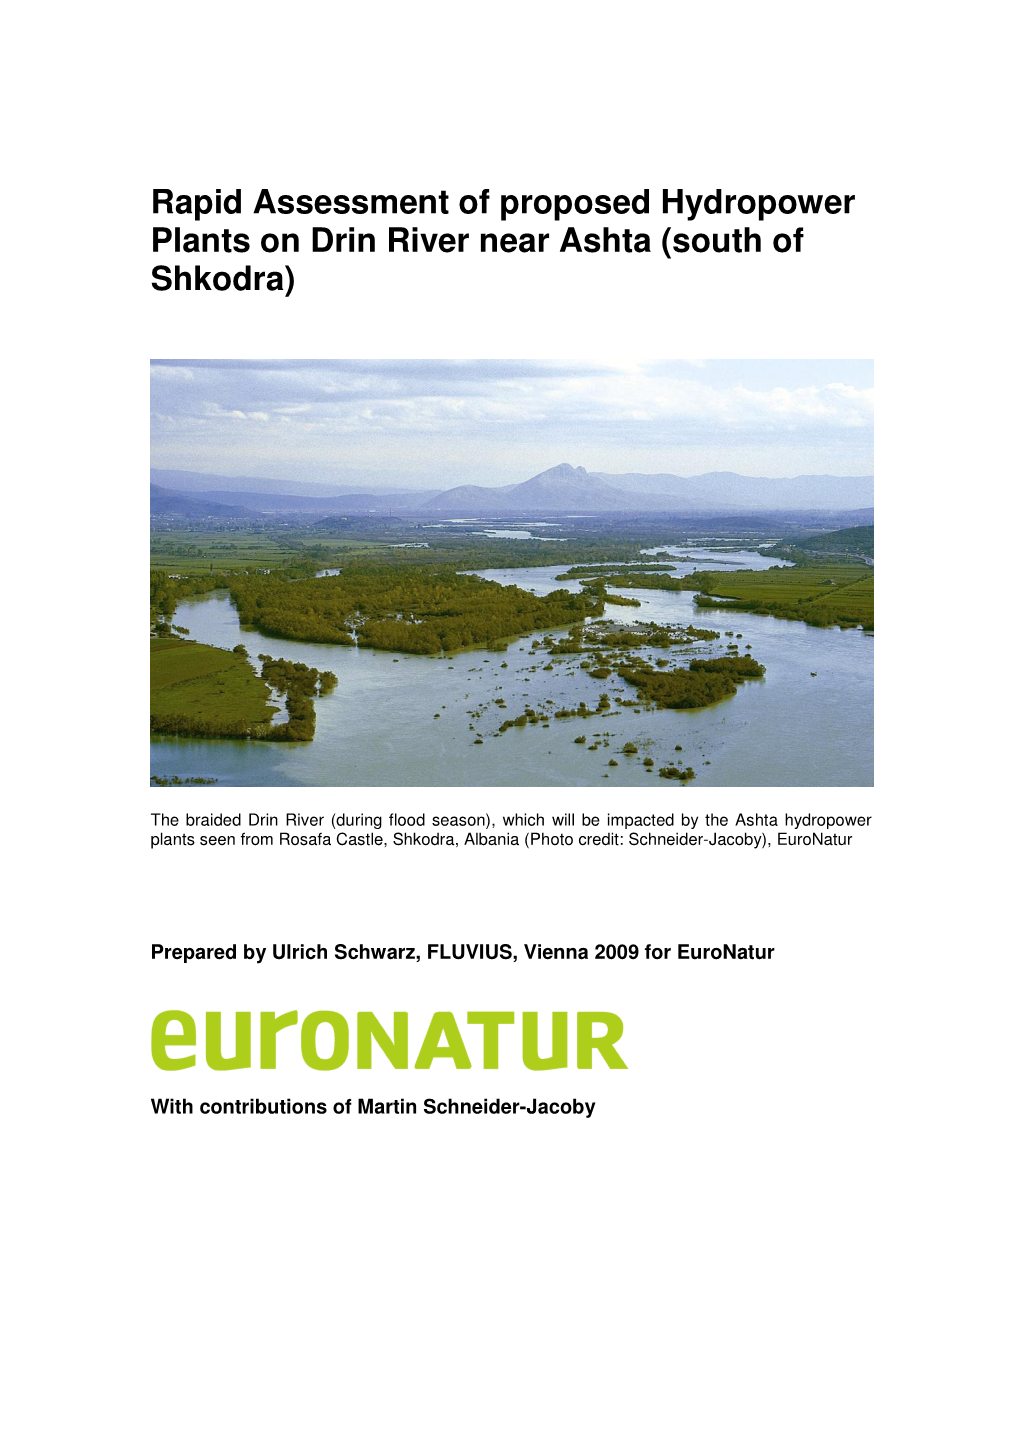 Rapid Assessment of Proposed Hydropower Plants on Drin River Near Ashta (South of Shkodra)